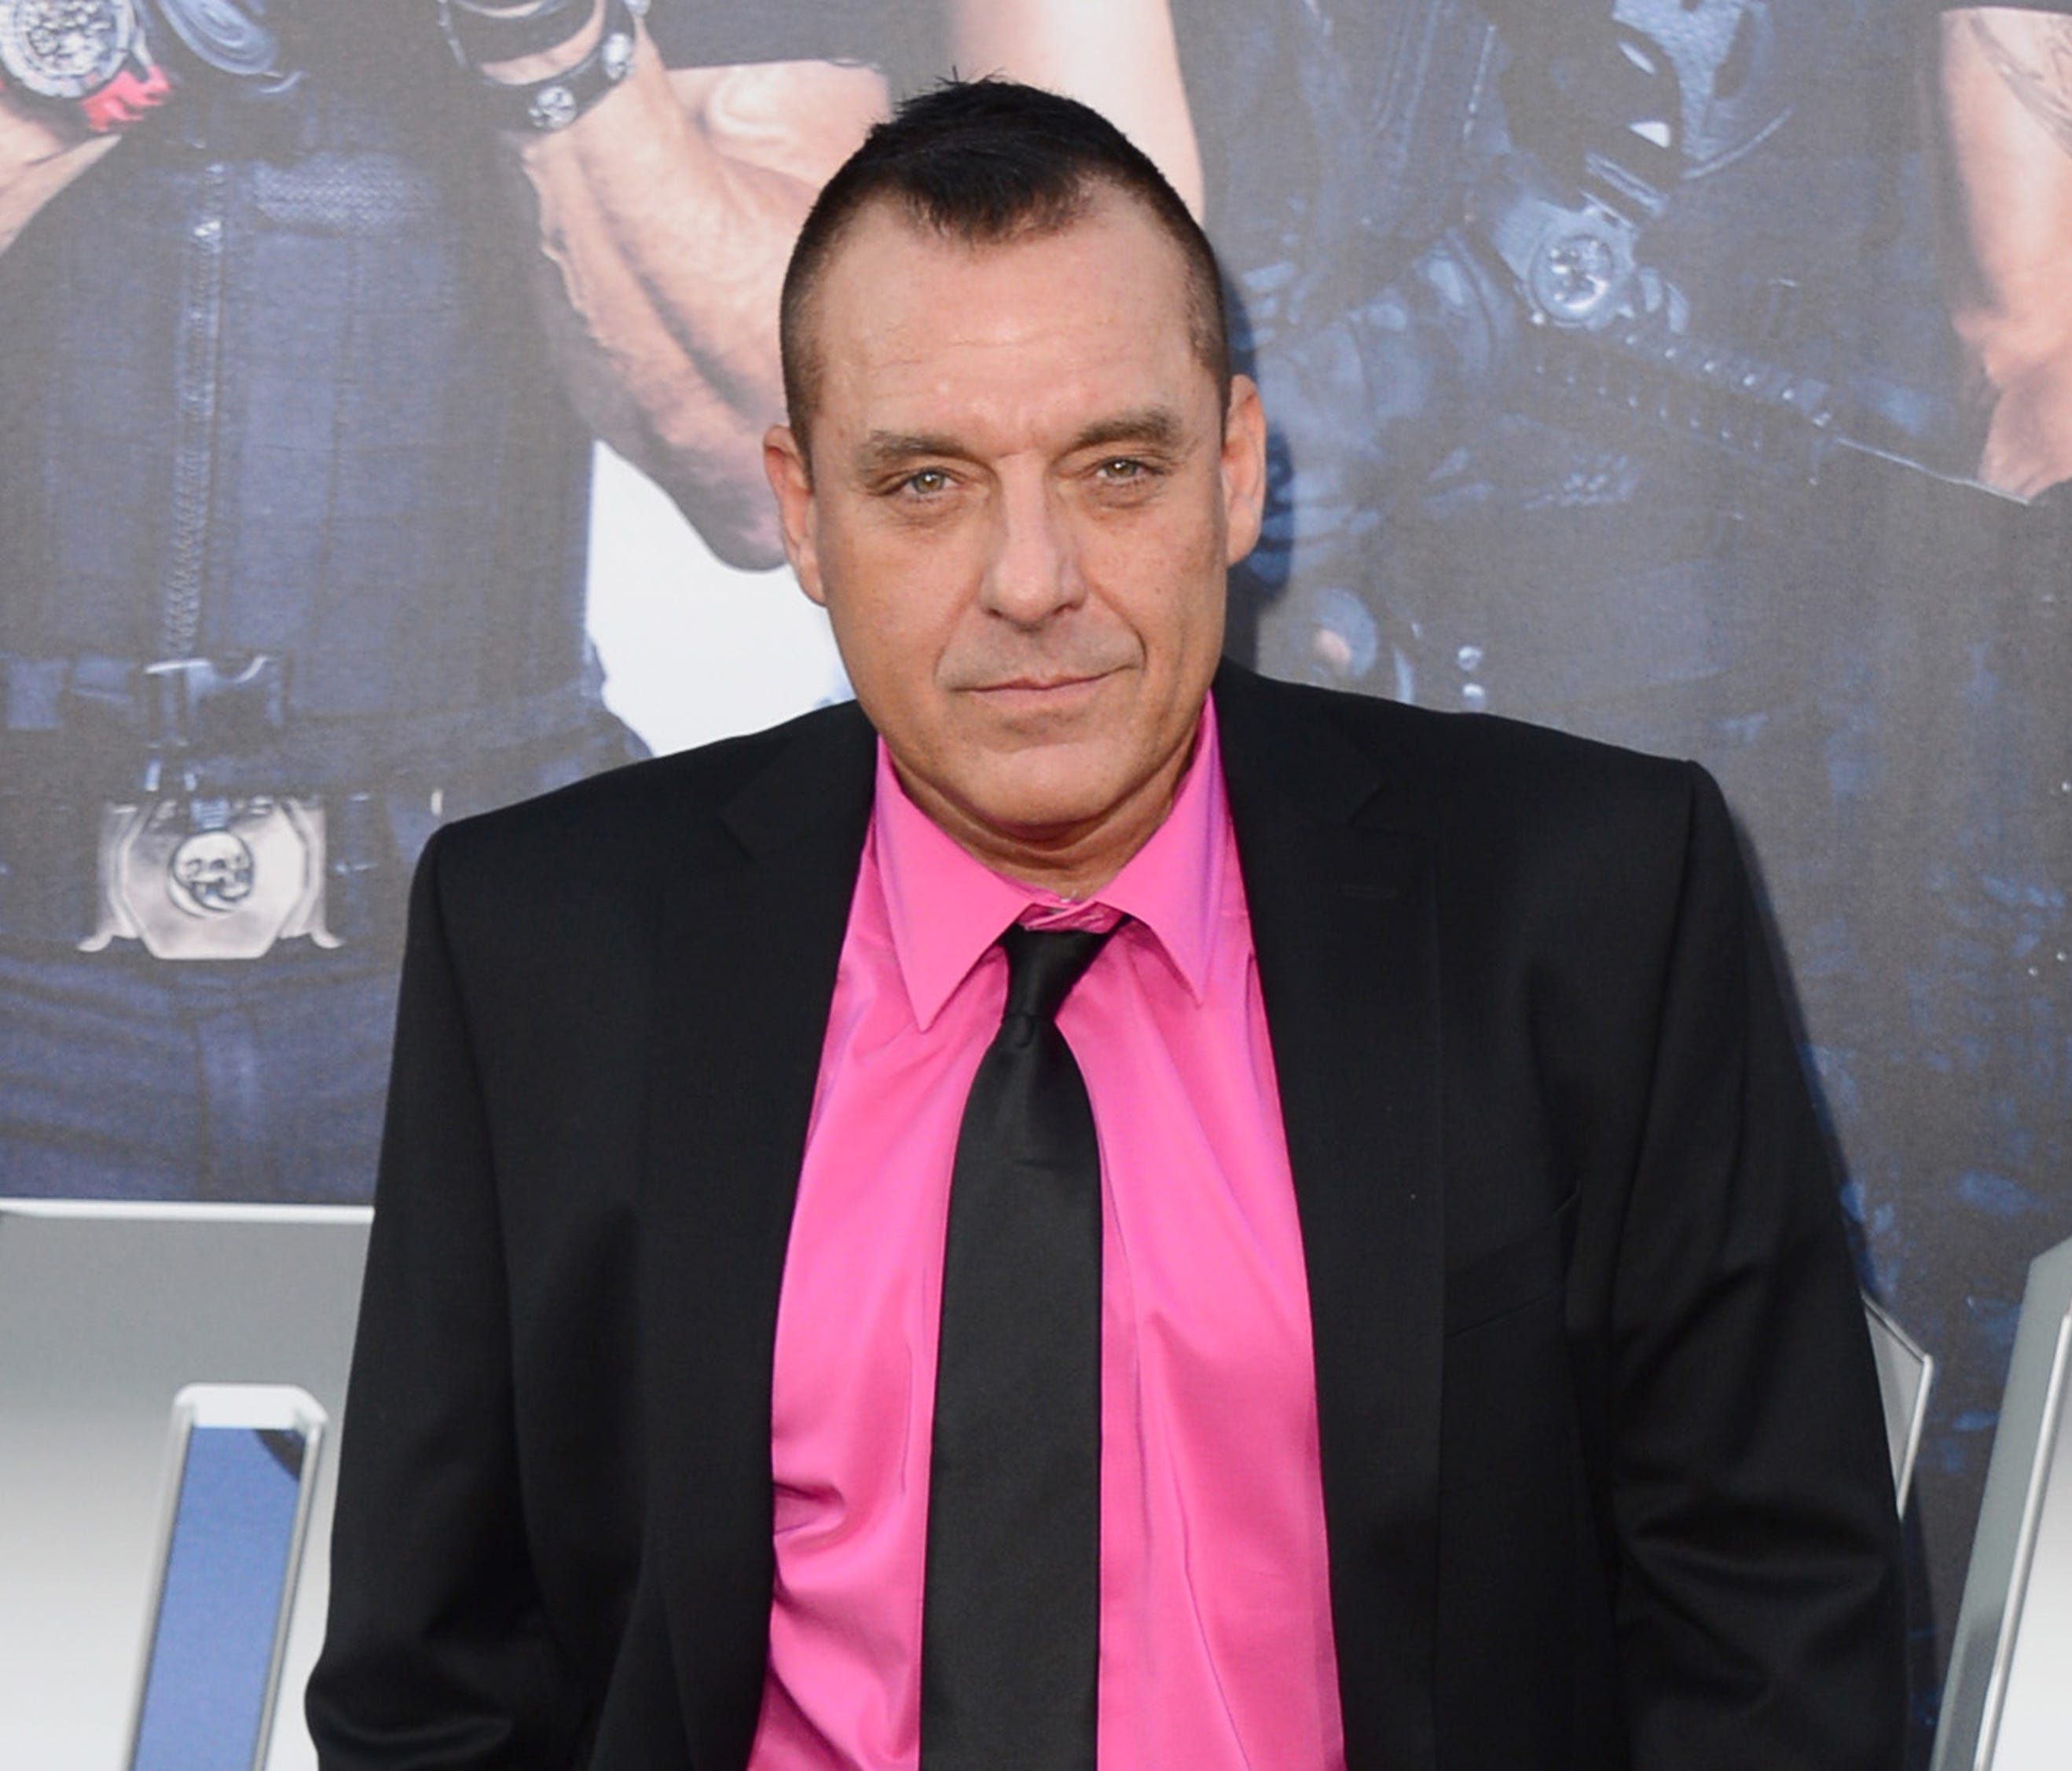 Tom Sizemore, arrived at a Hollywood premiere, has been accused of sexually abusing an 11-year-old girl on a 2003 movie set.